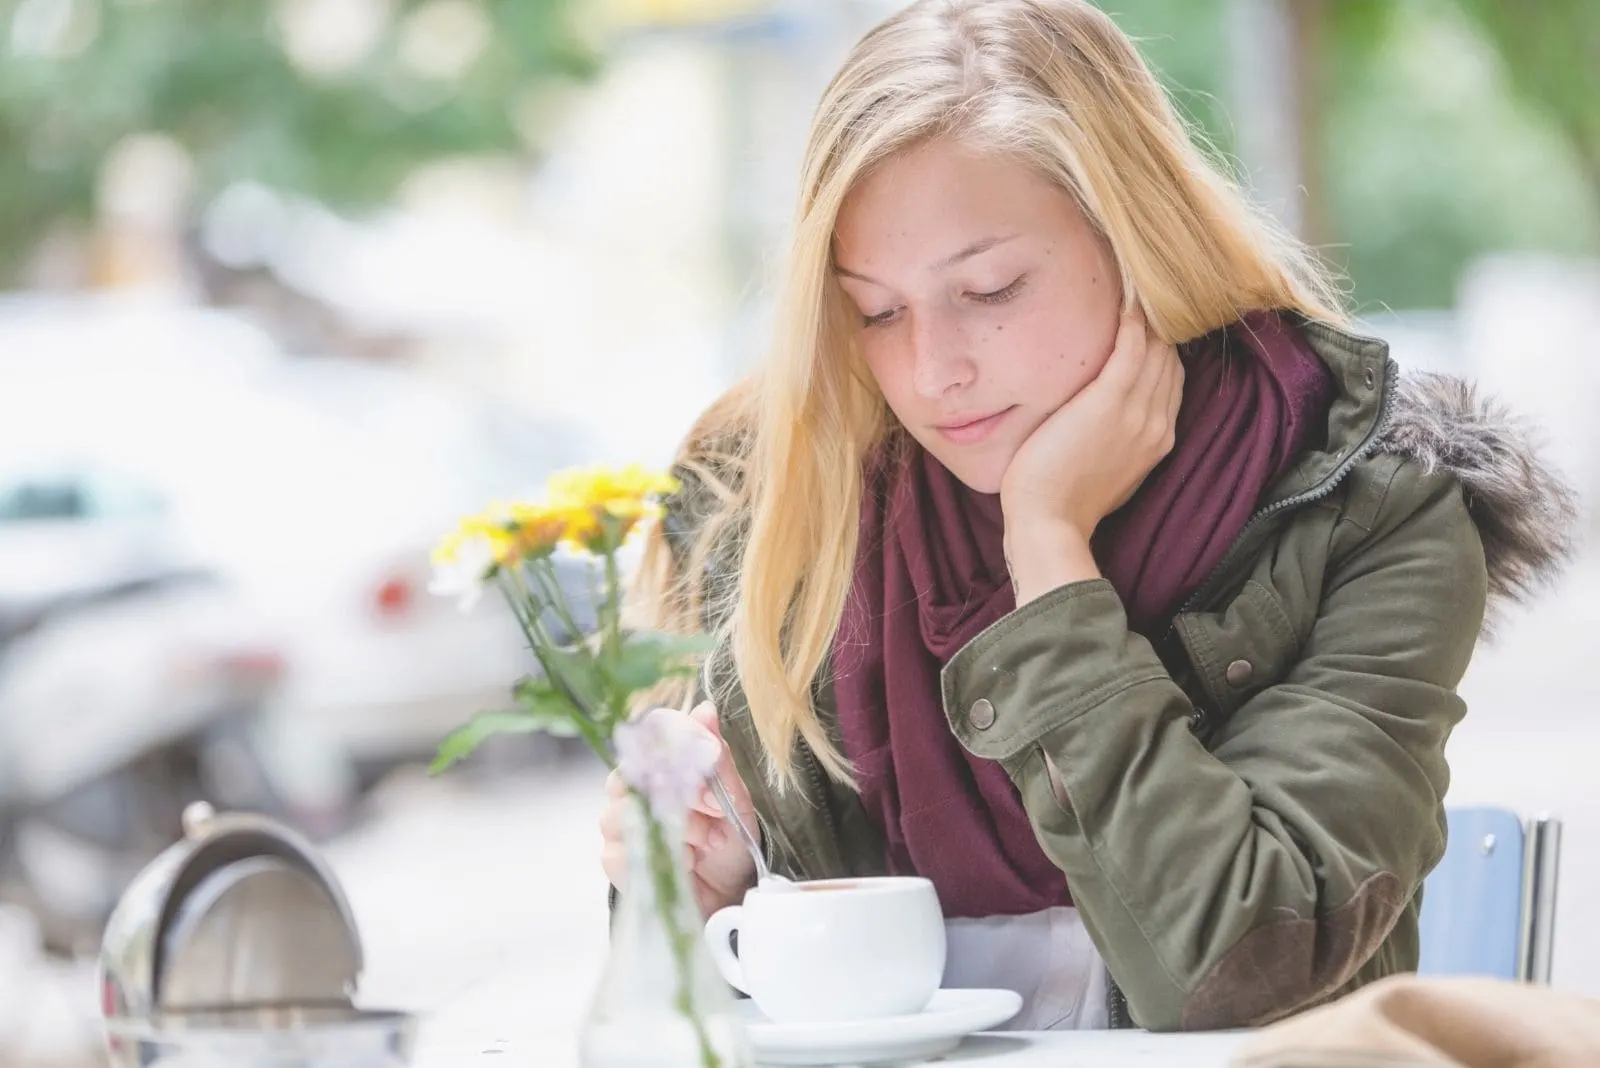 woman waiting in cafe outside lost in thoughts and mixing her coffee 